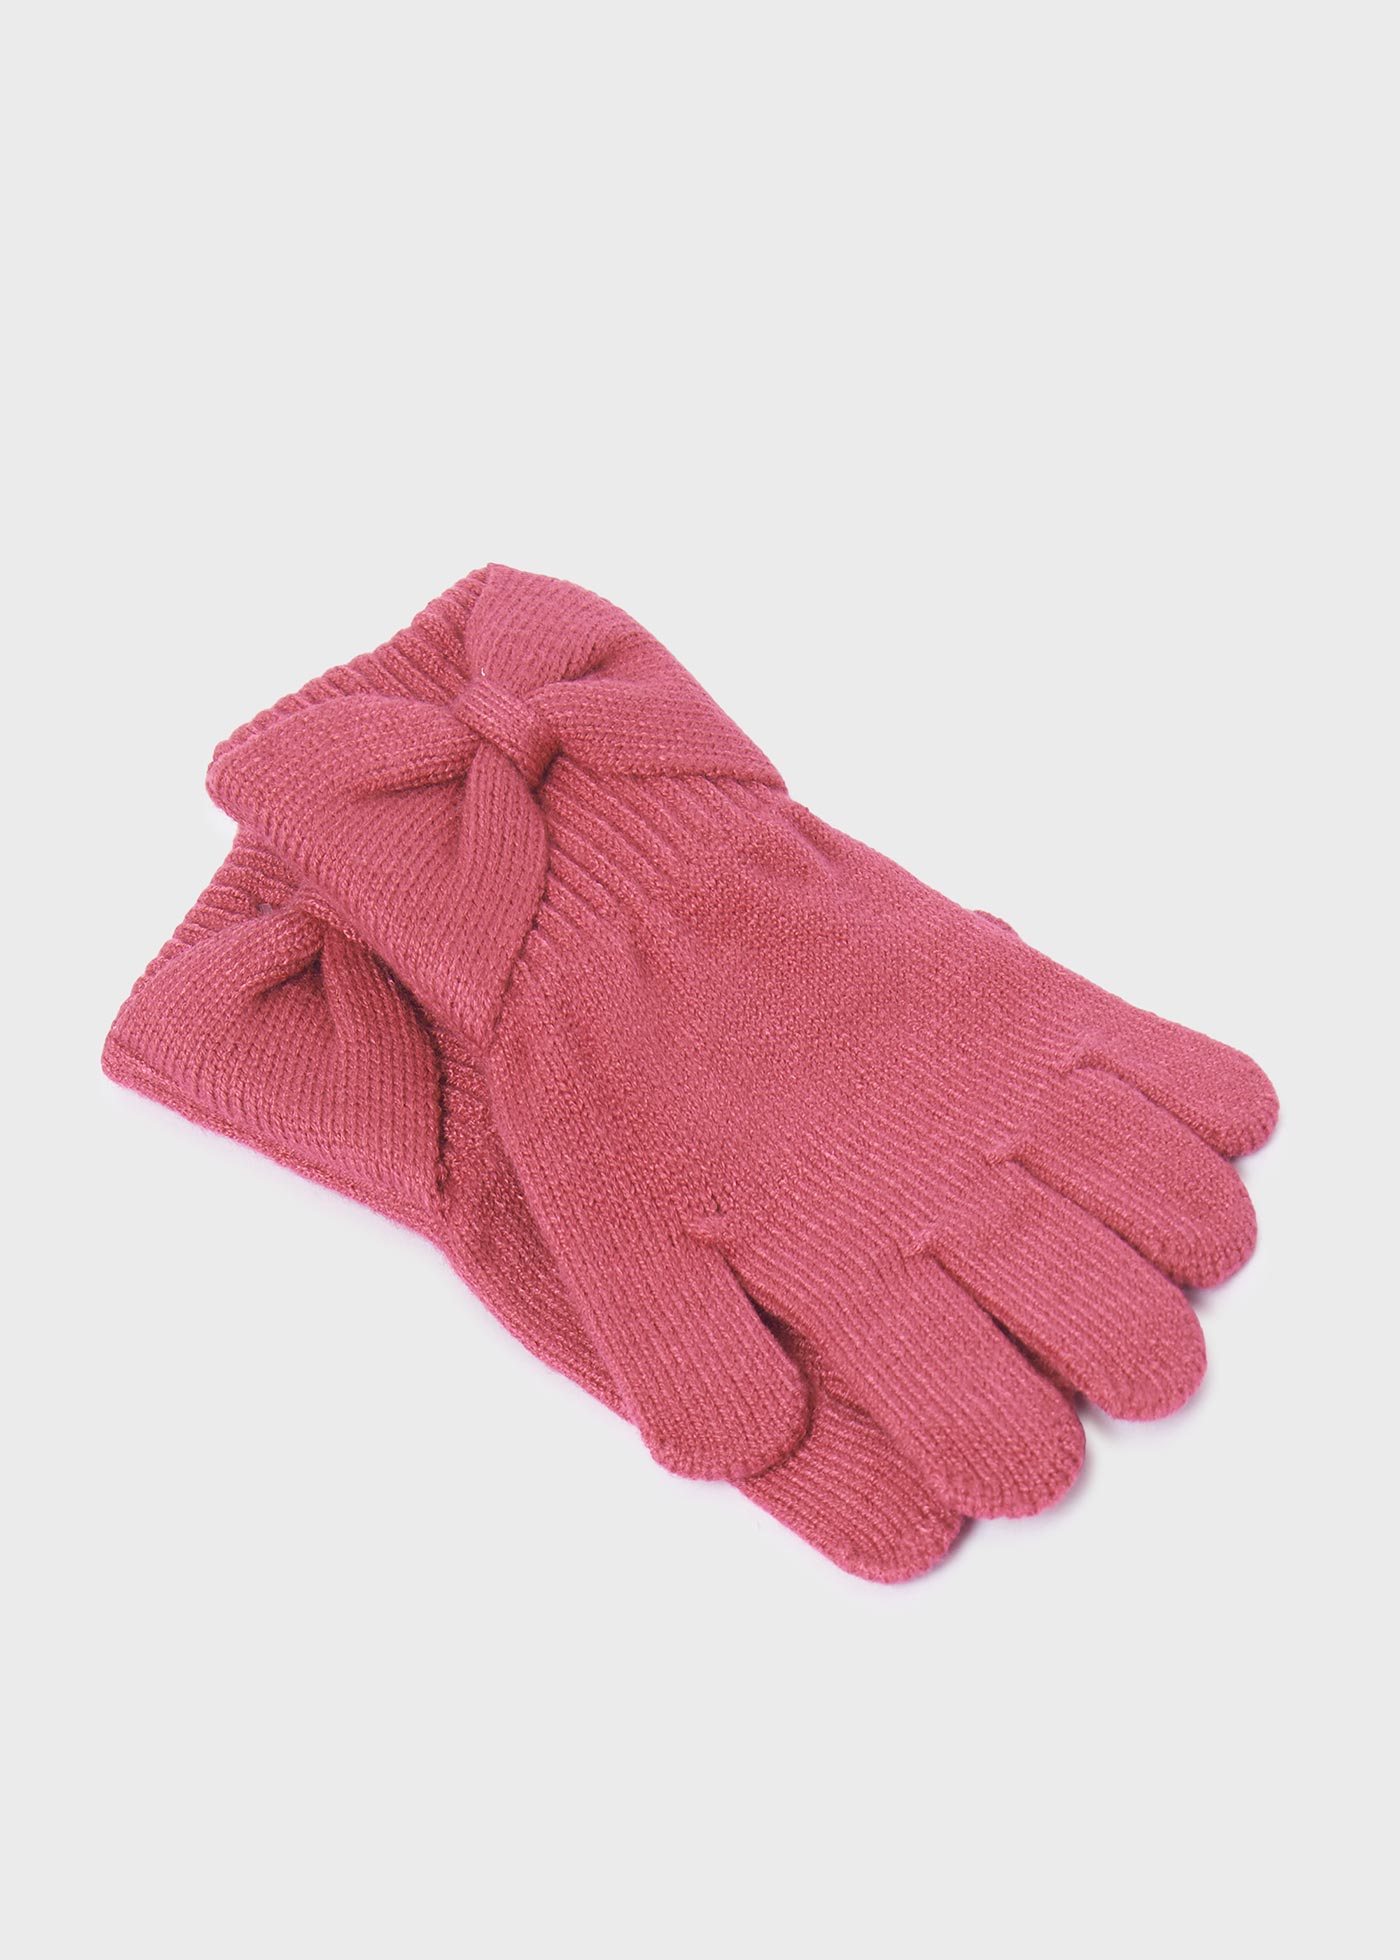 Bow Gloves in Raspberry